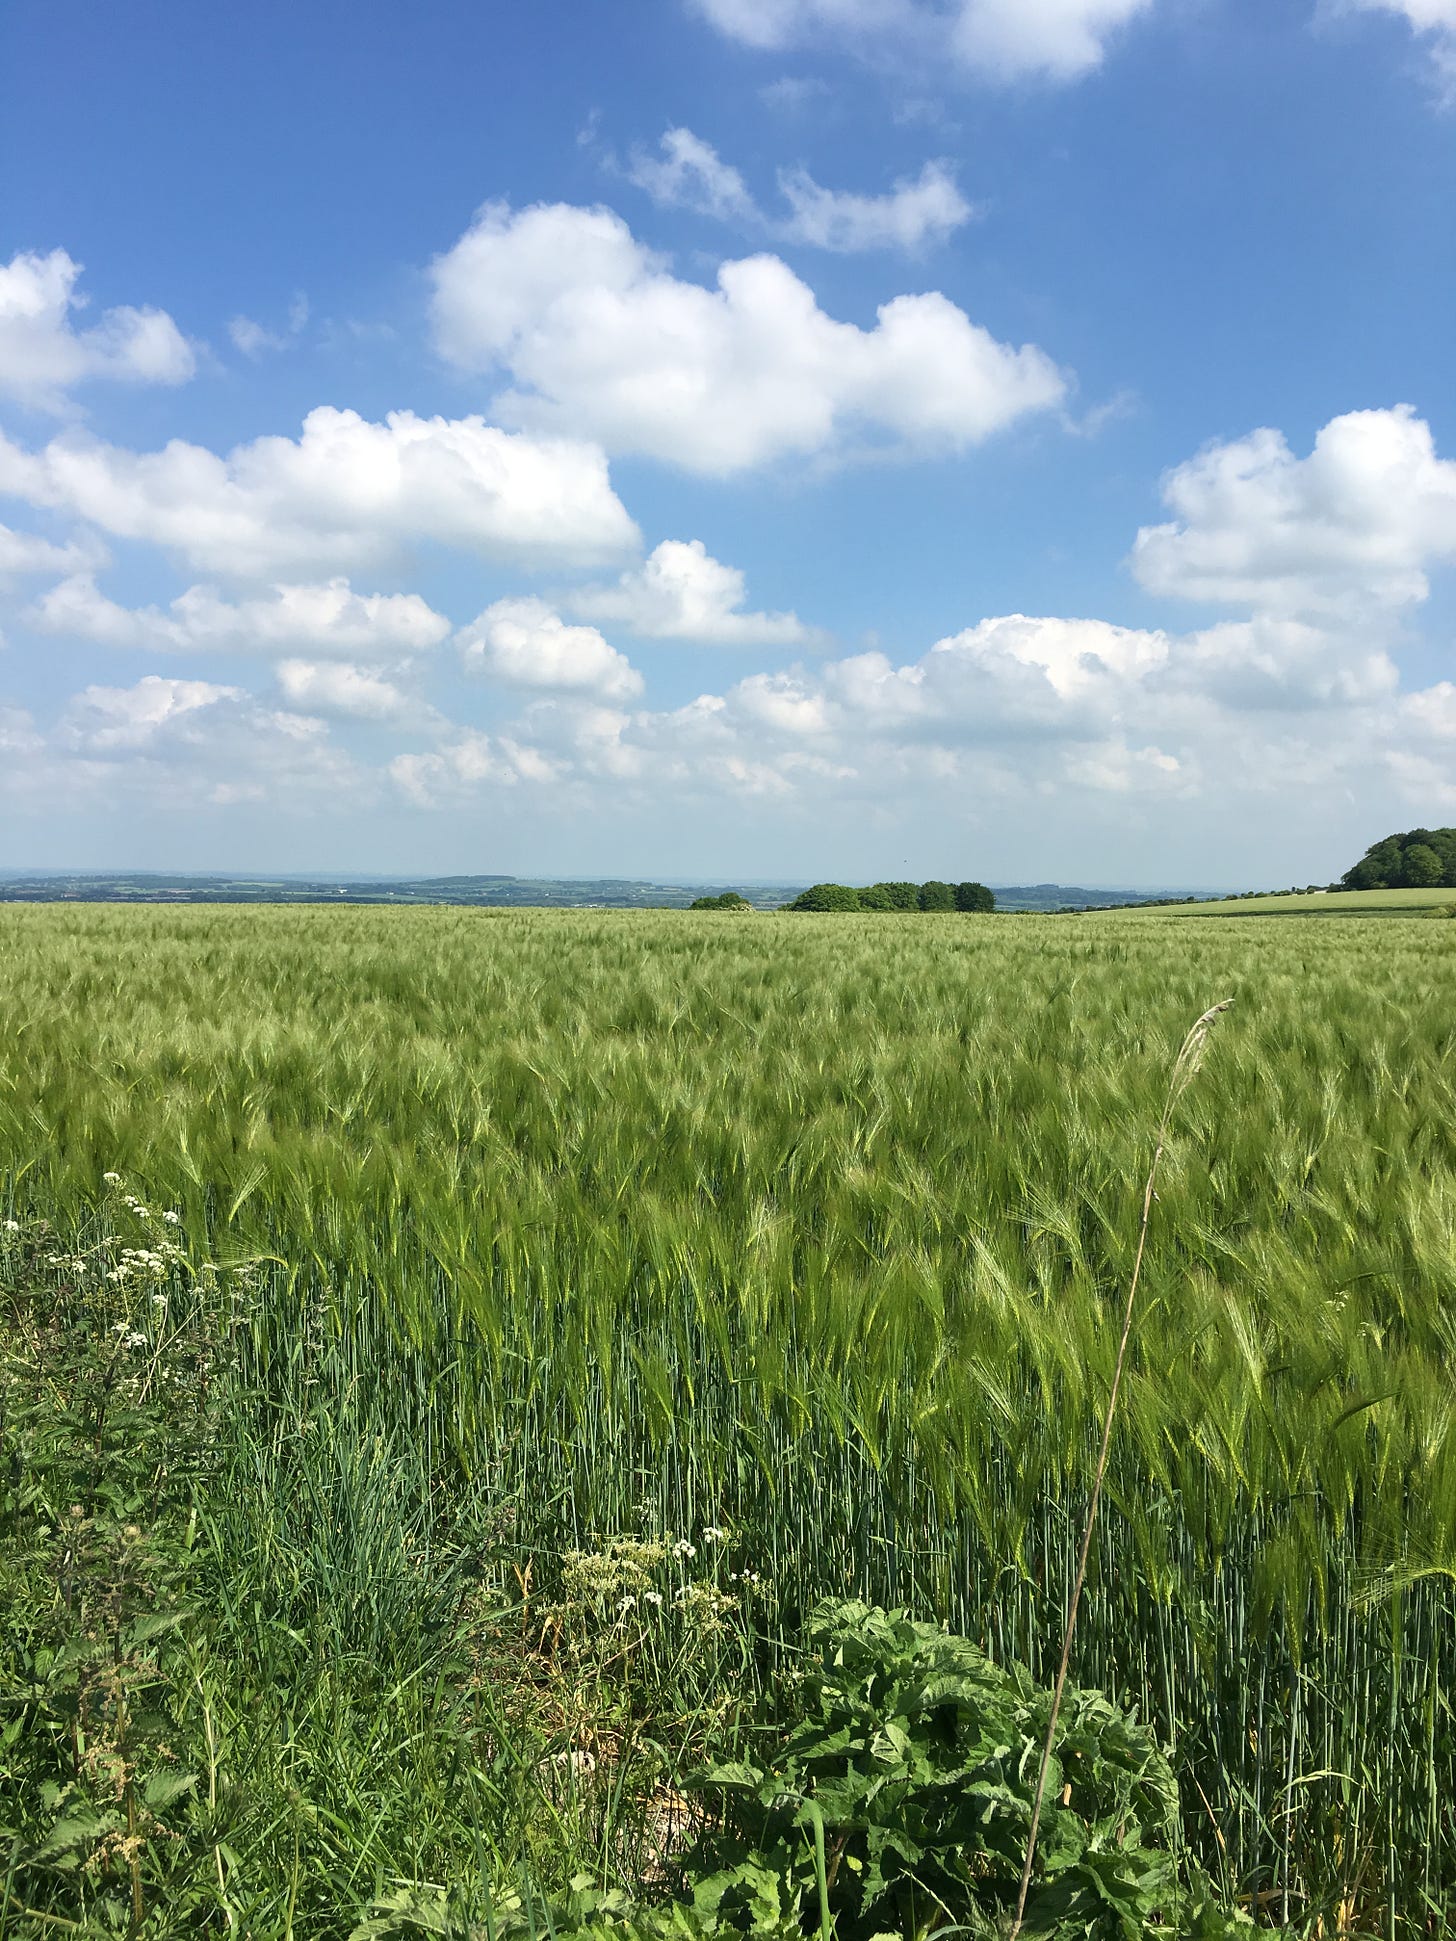 A wheat field in spring, with clumps of trees and distant hills.